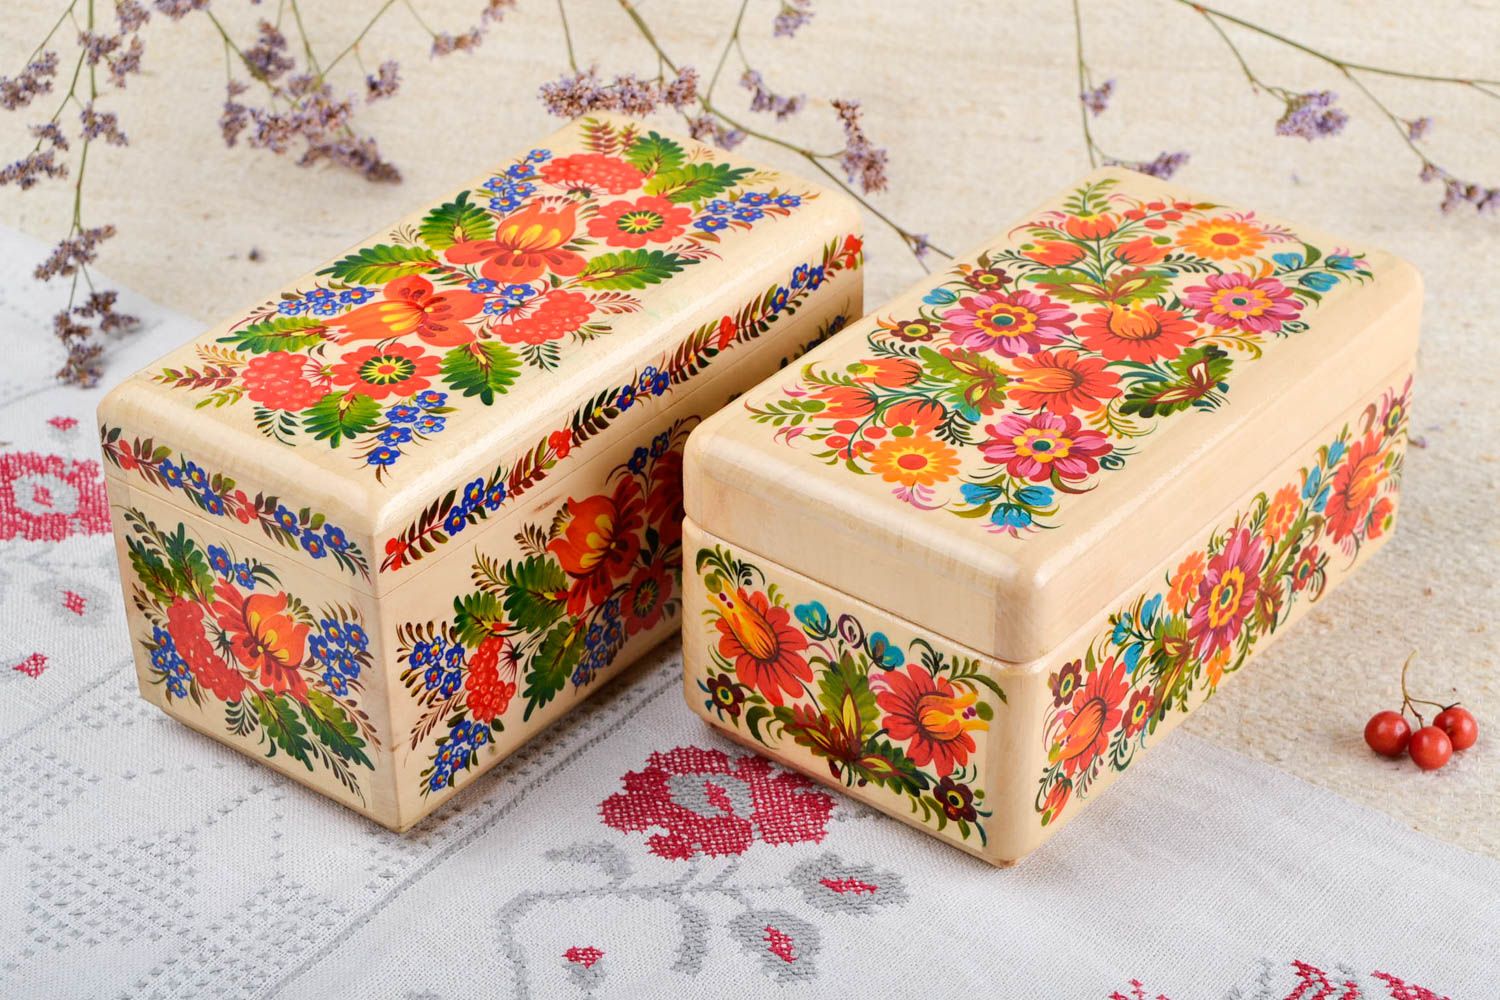 Handmade gifts wooden jewelry boxes jewellery gift boxes rustic home decor photo 1